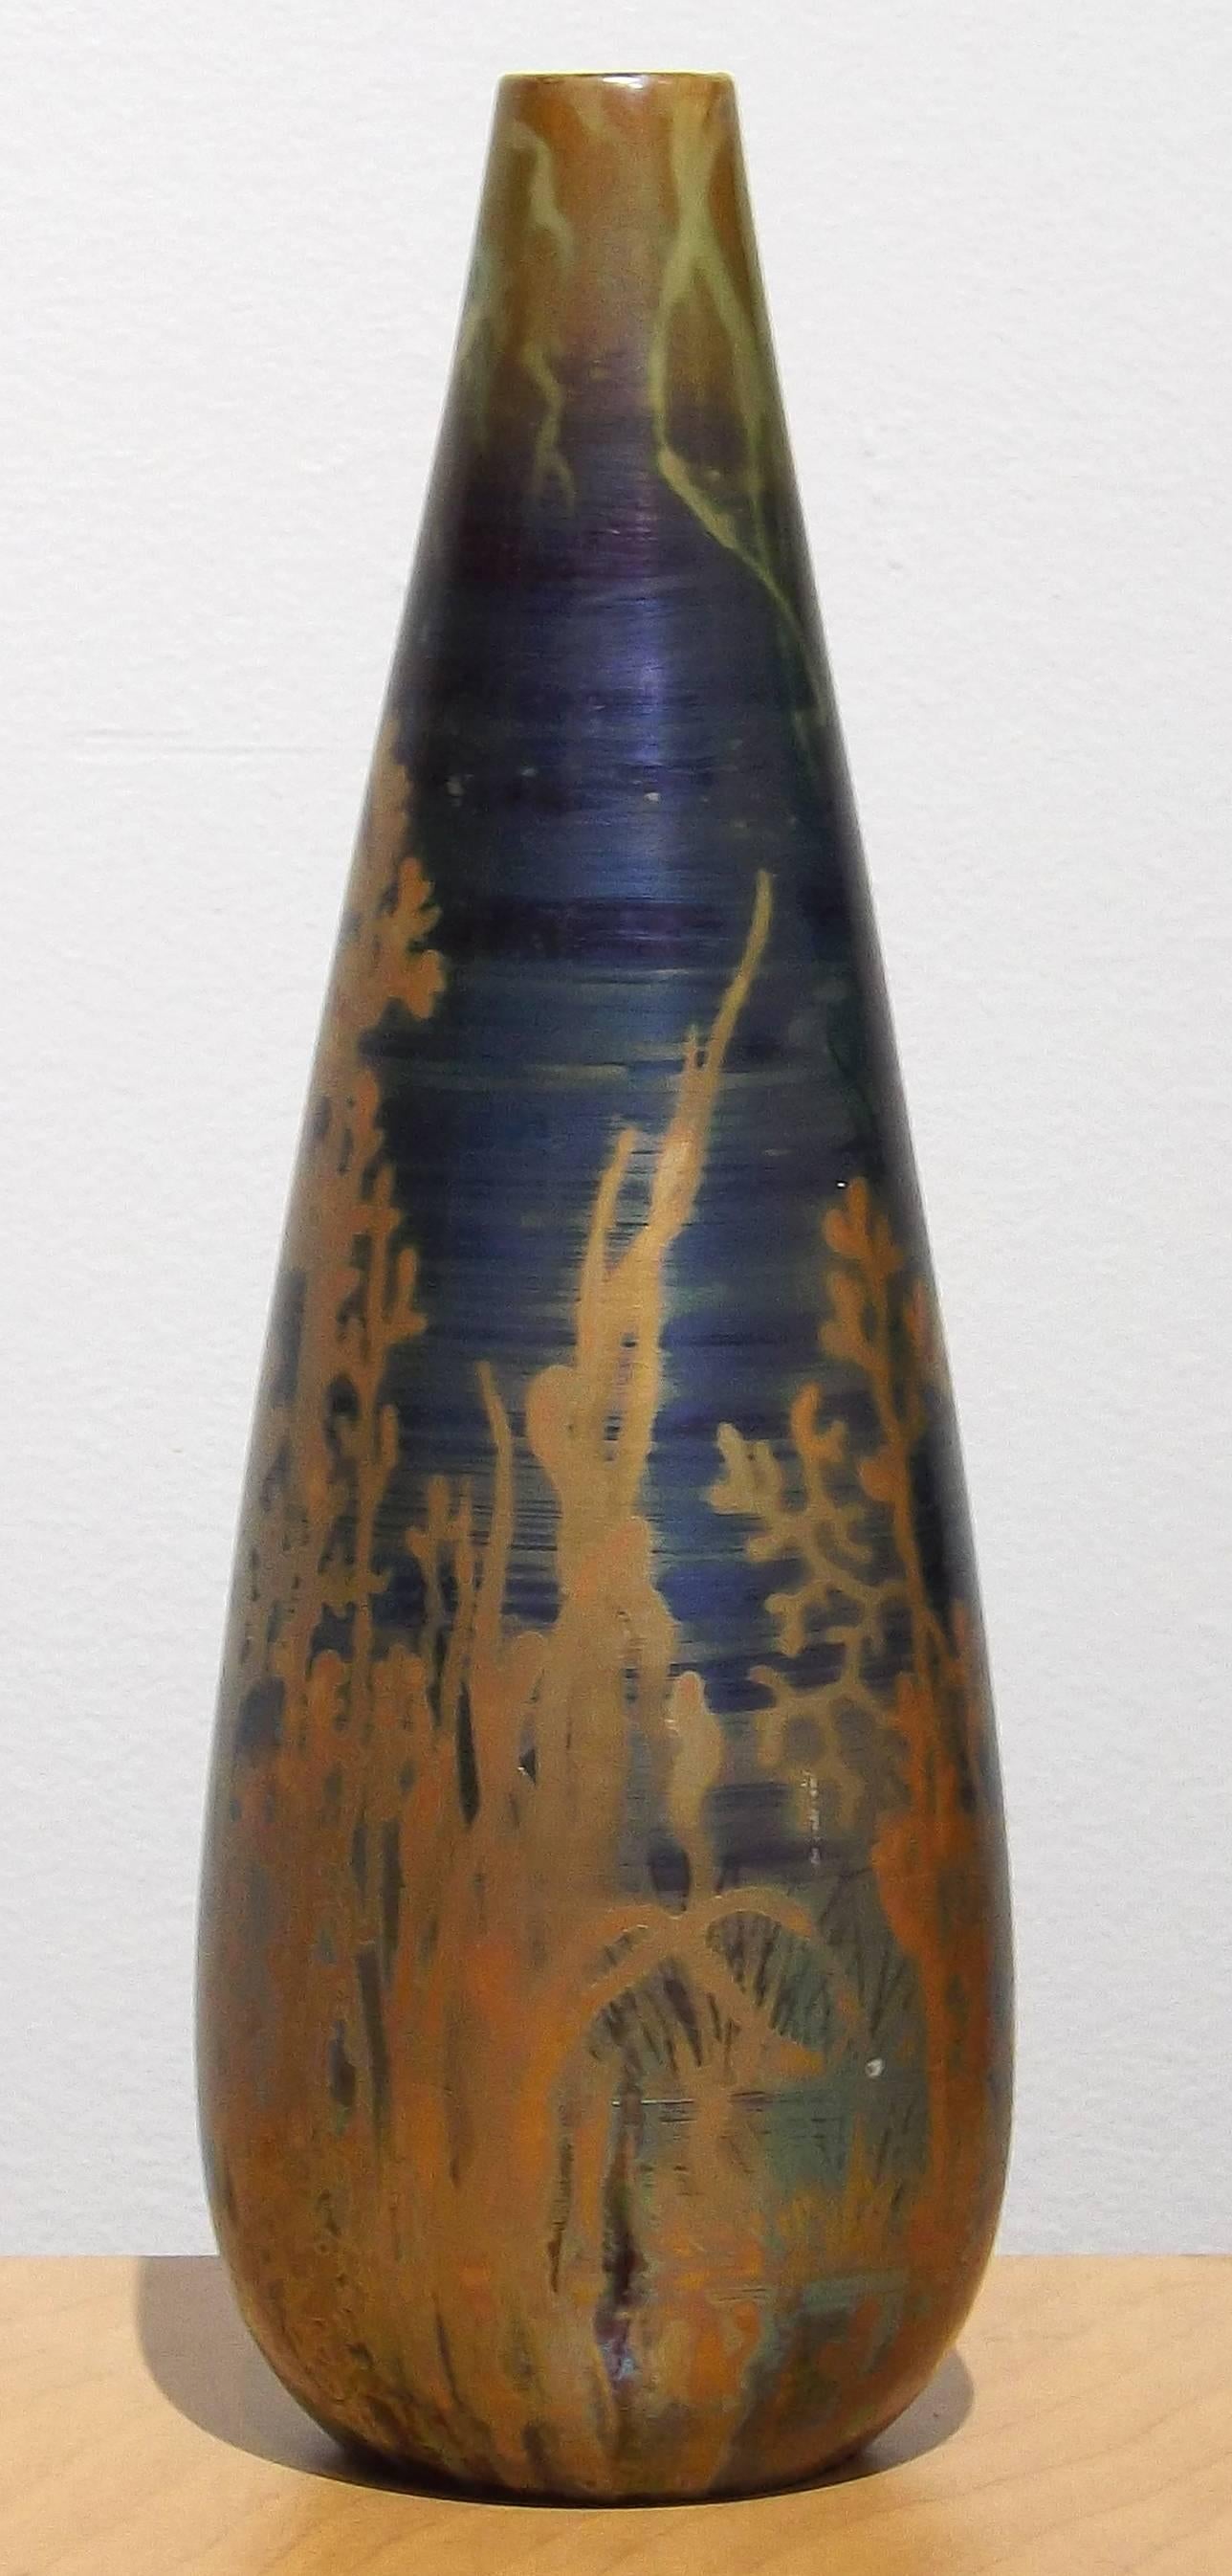 A wonderful Art Nouveau vase made by Clément Massier (1844-1917) with an underwater scene of water plants rising up to meet the roots of water lilies, executed in a magnificent blue and gold luster. Painted and impressed signature of the